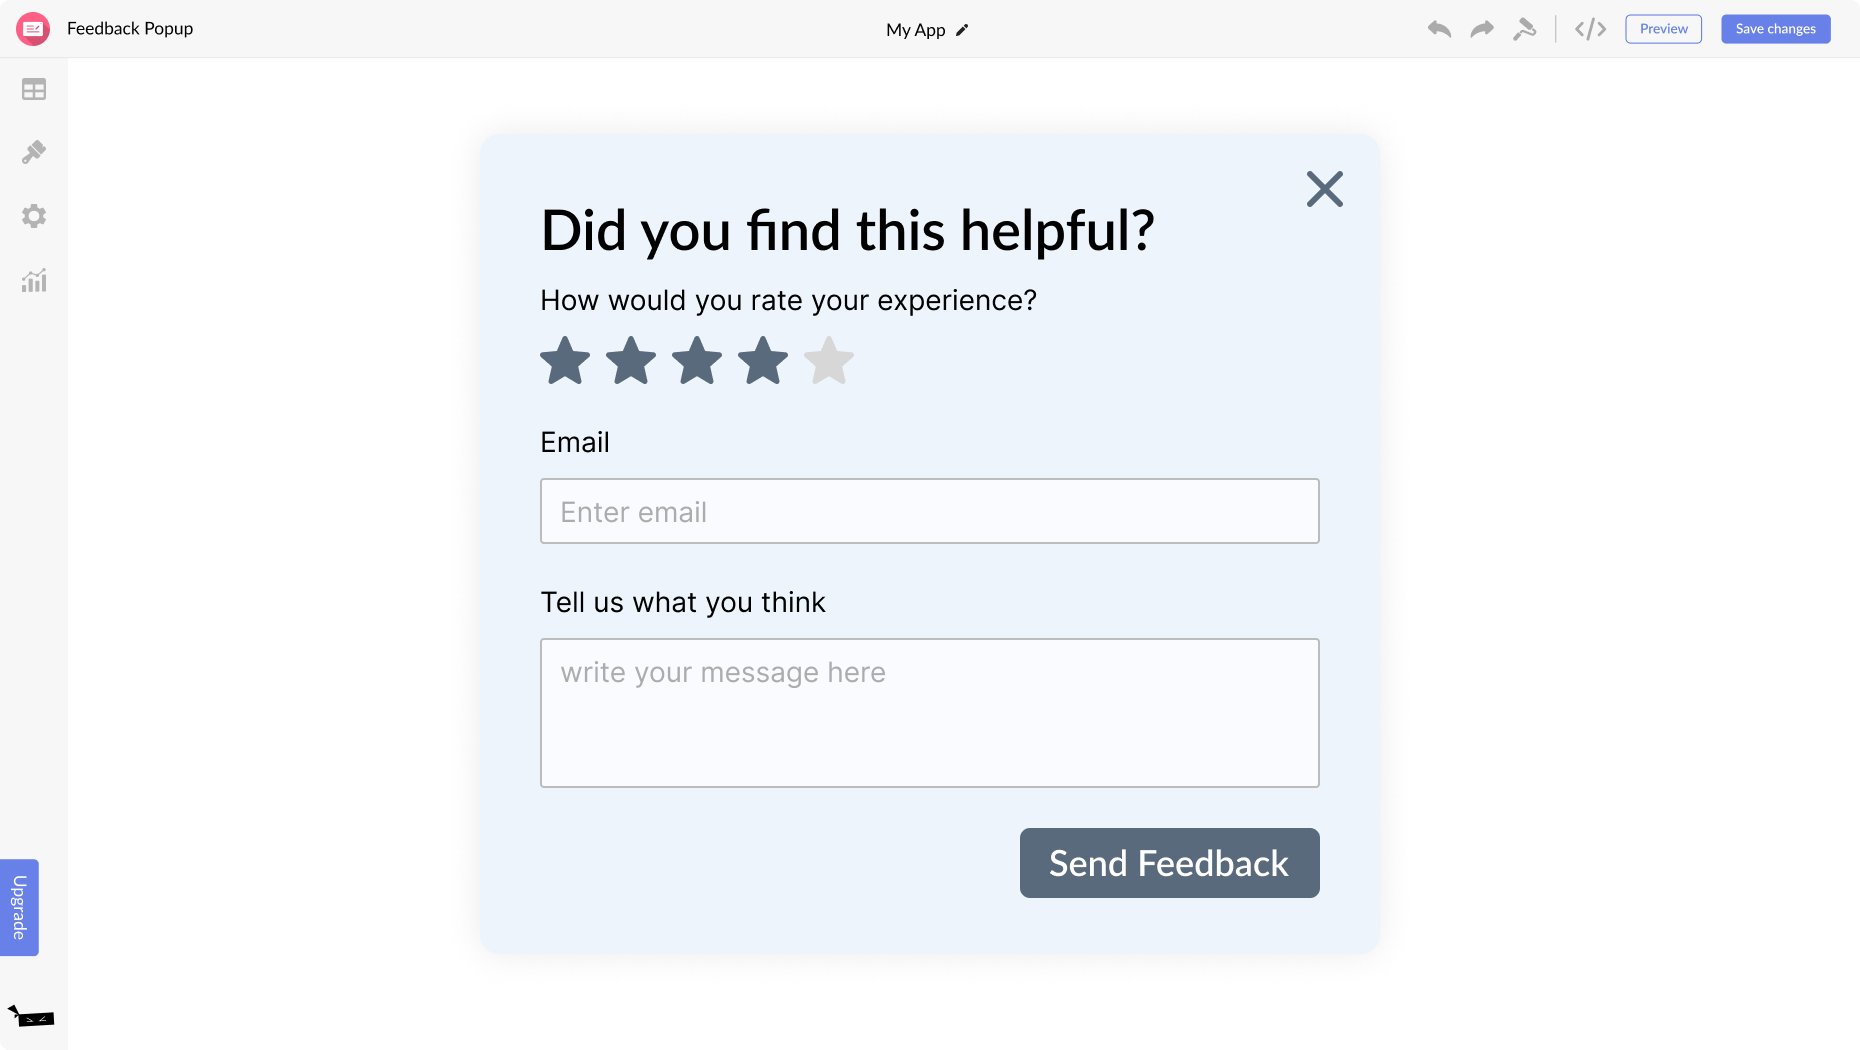 Feedback Popup for Cloudflare Pages